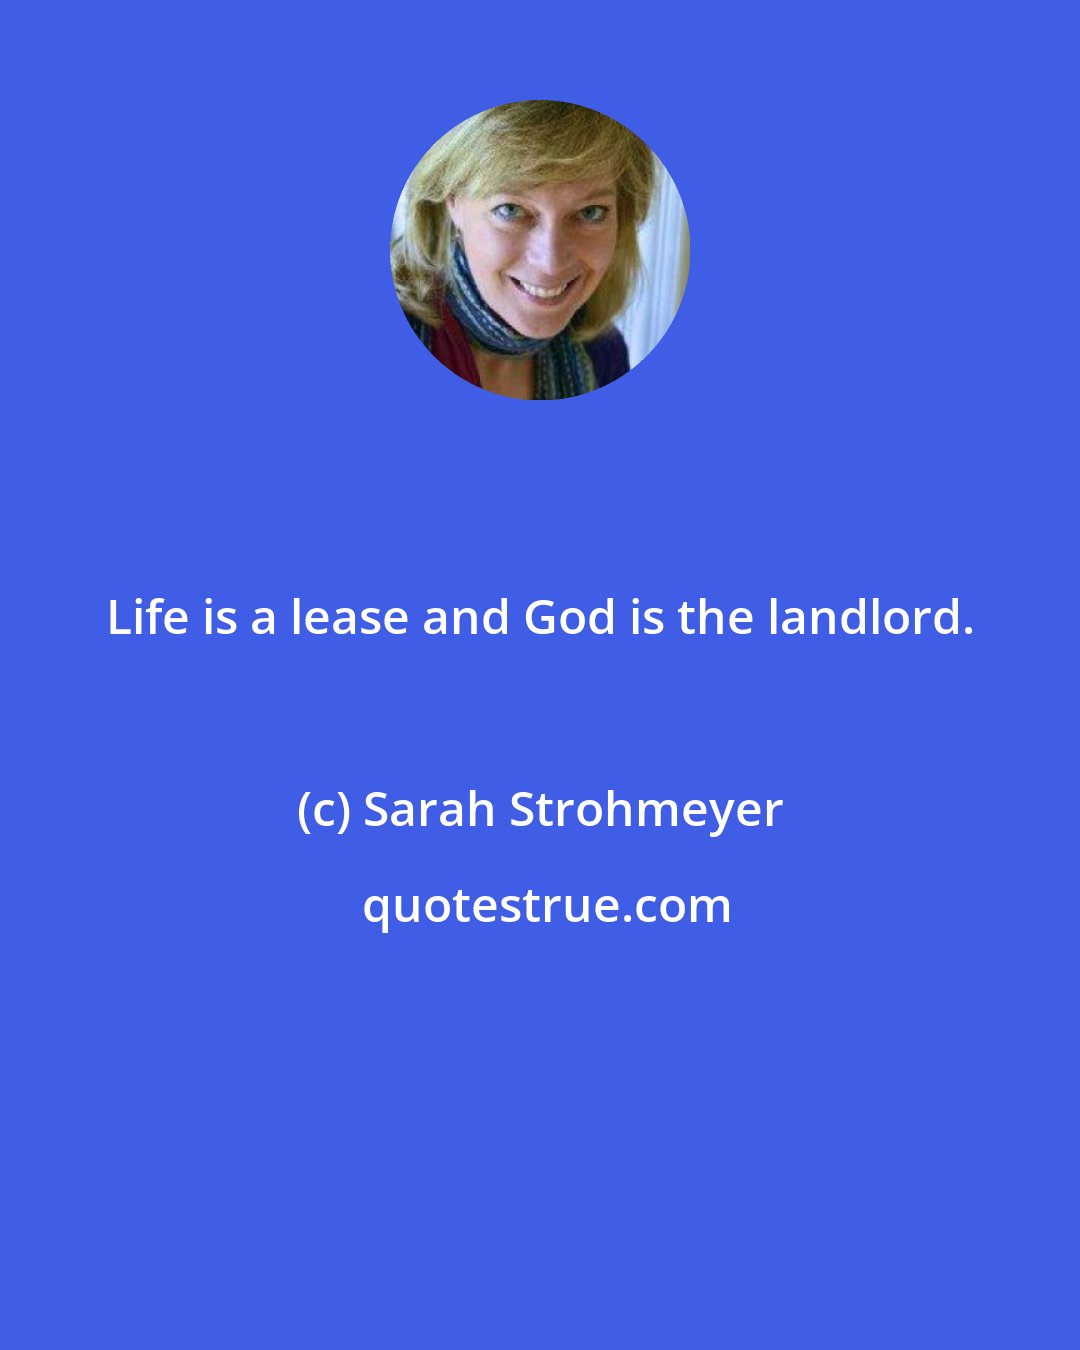 Sarah Strohmeyer: Life is a lease and God is the landlord.